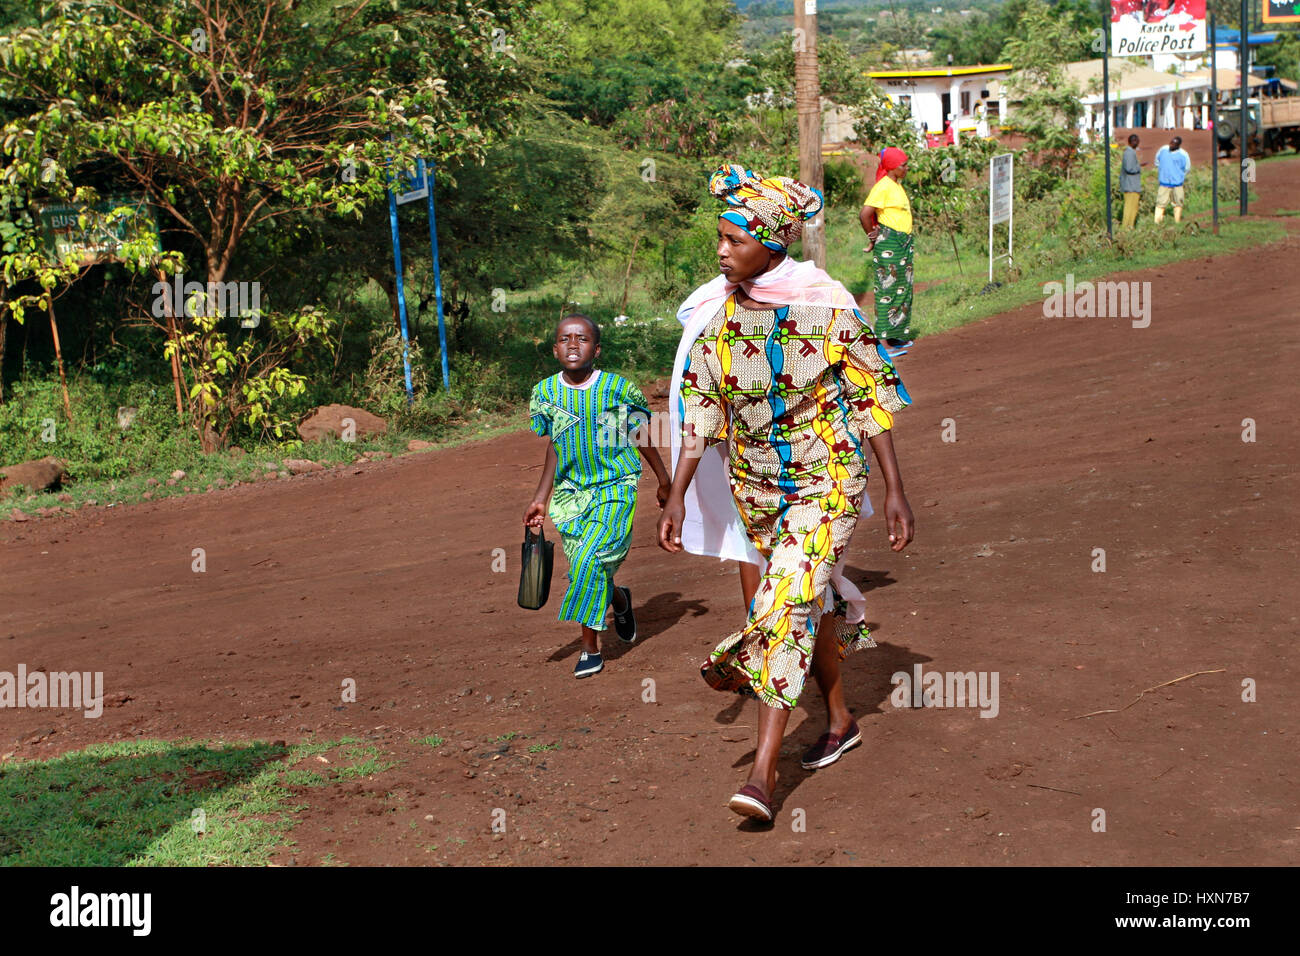 Makuyuni, Arusha, Tanzania - February 13, 2008: Blacks african people, unidentified woman and unidentified  child approximate age of 10 years old, are Stock Photo